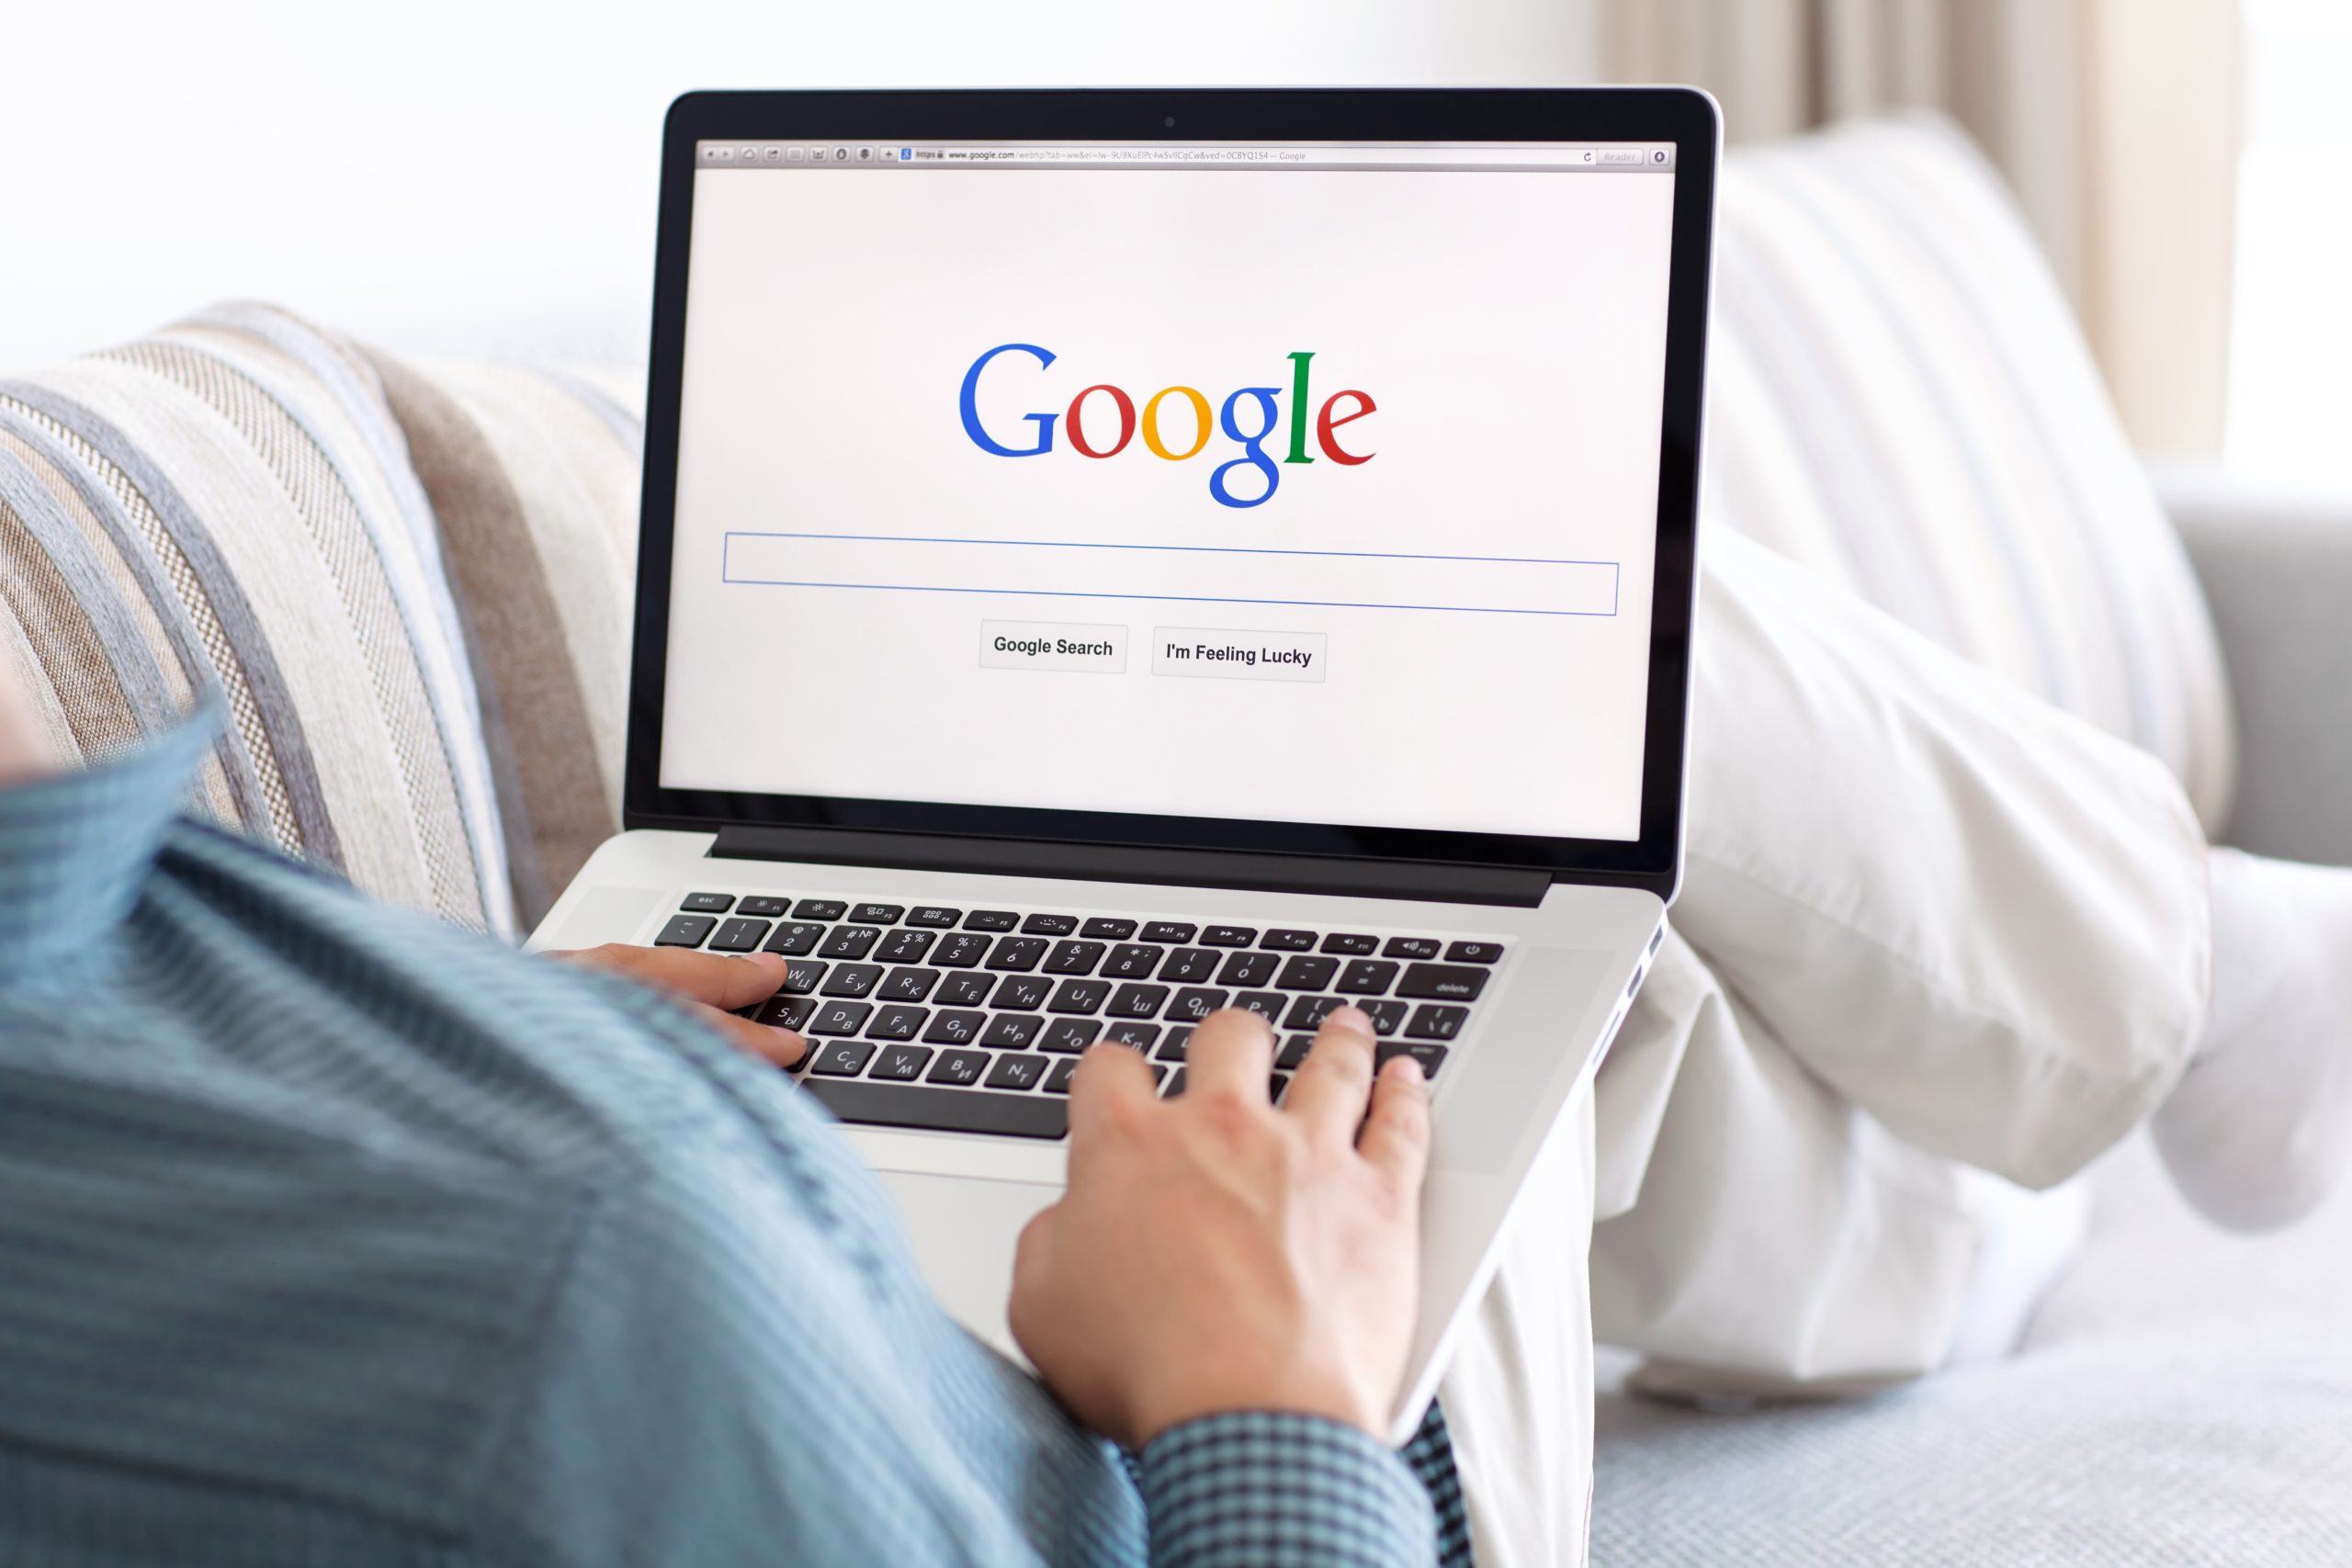 How To Find The Most Searched Keywords On Google